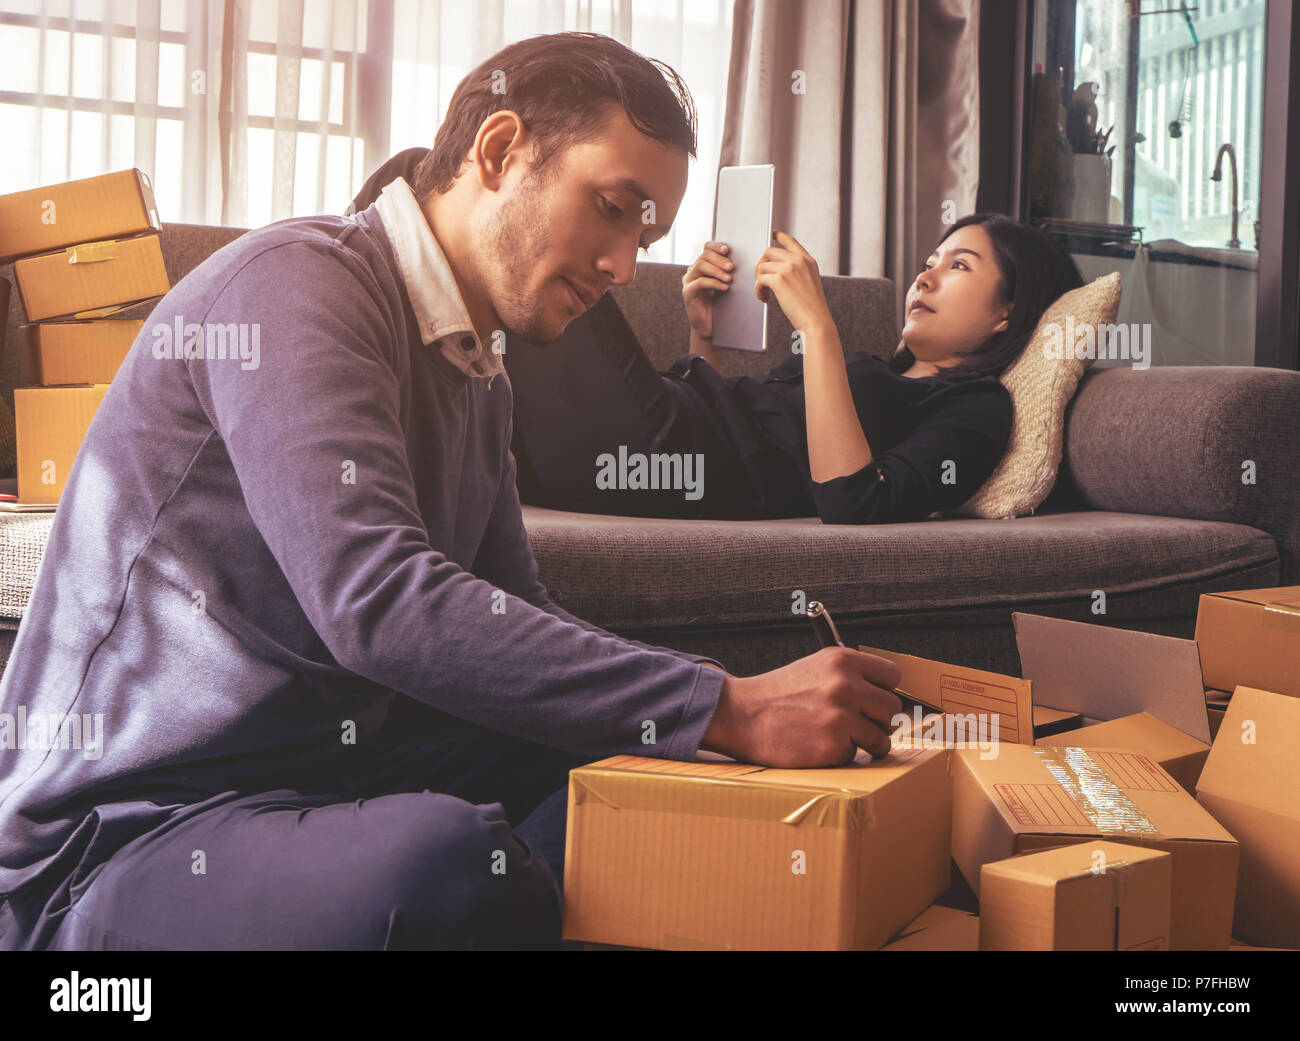 Business life partner is packing boxes for online shop delivery Stock Photo